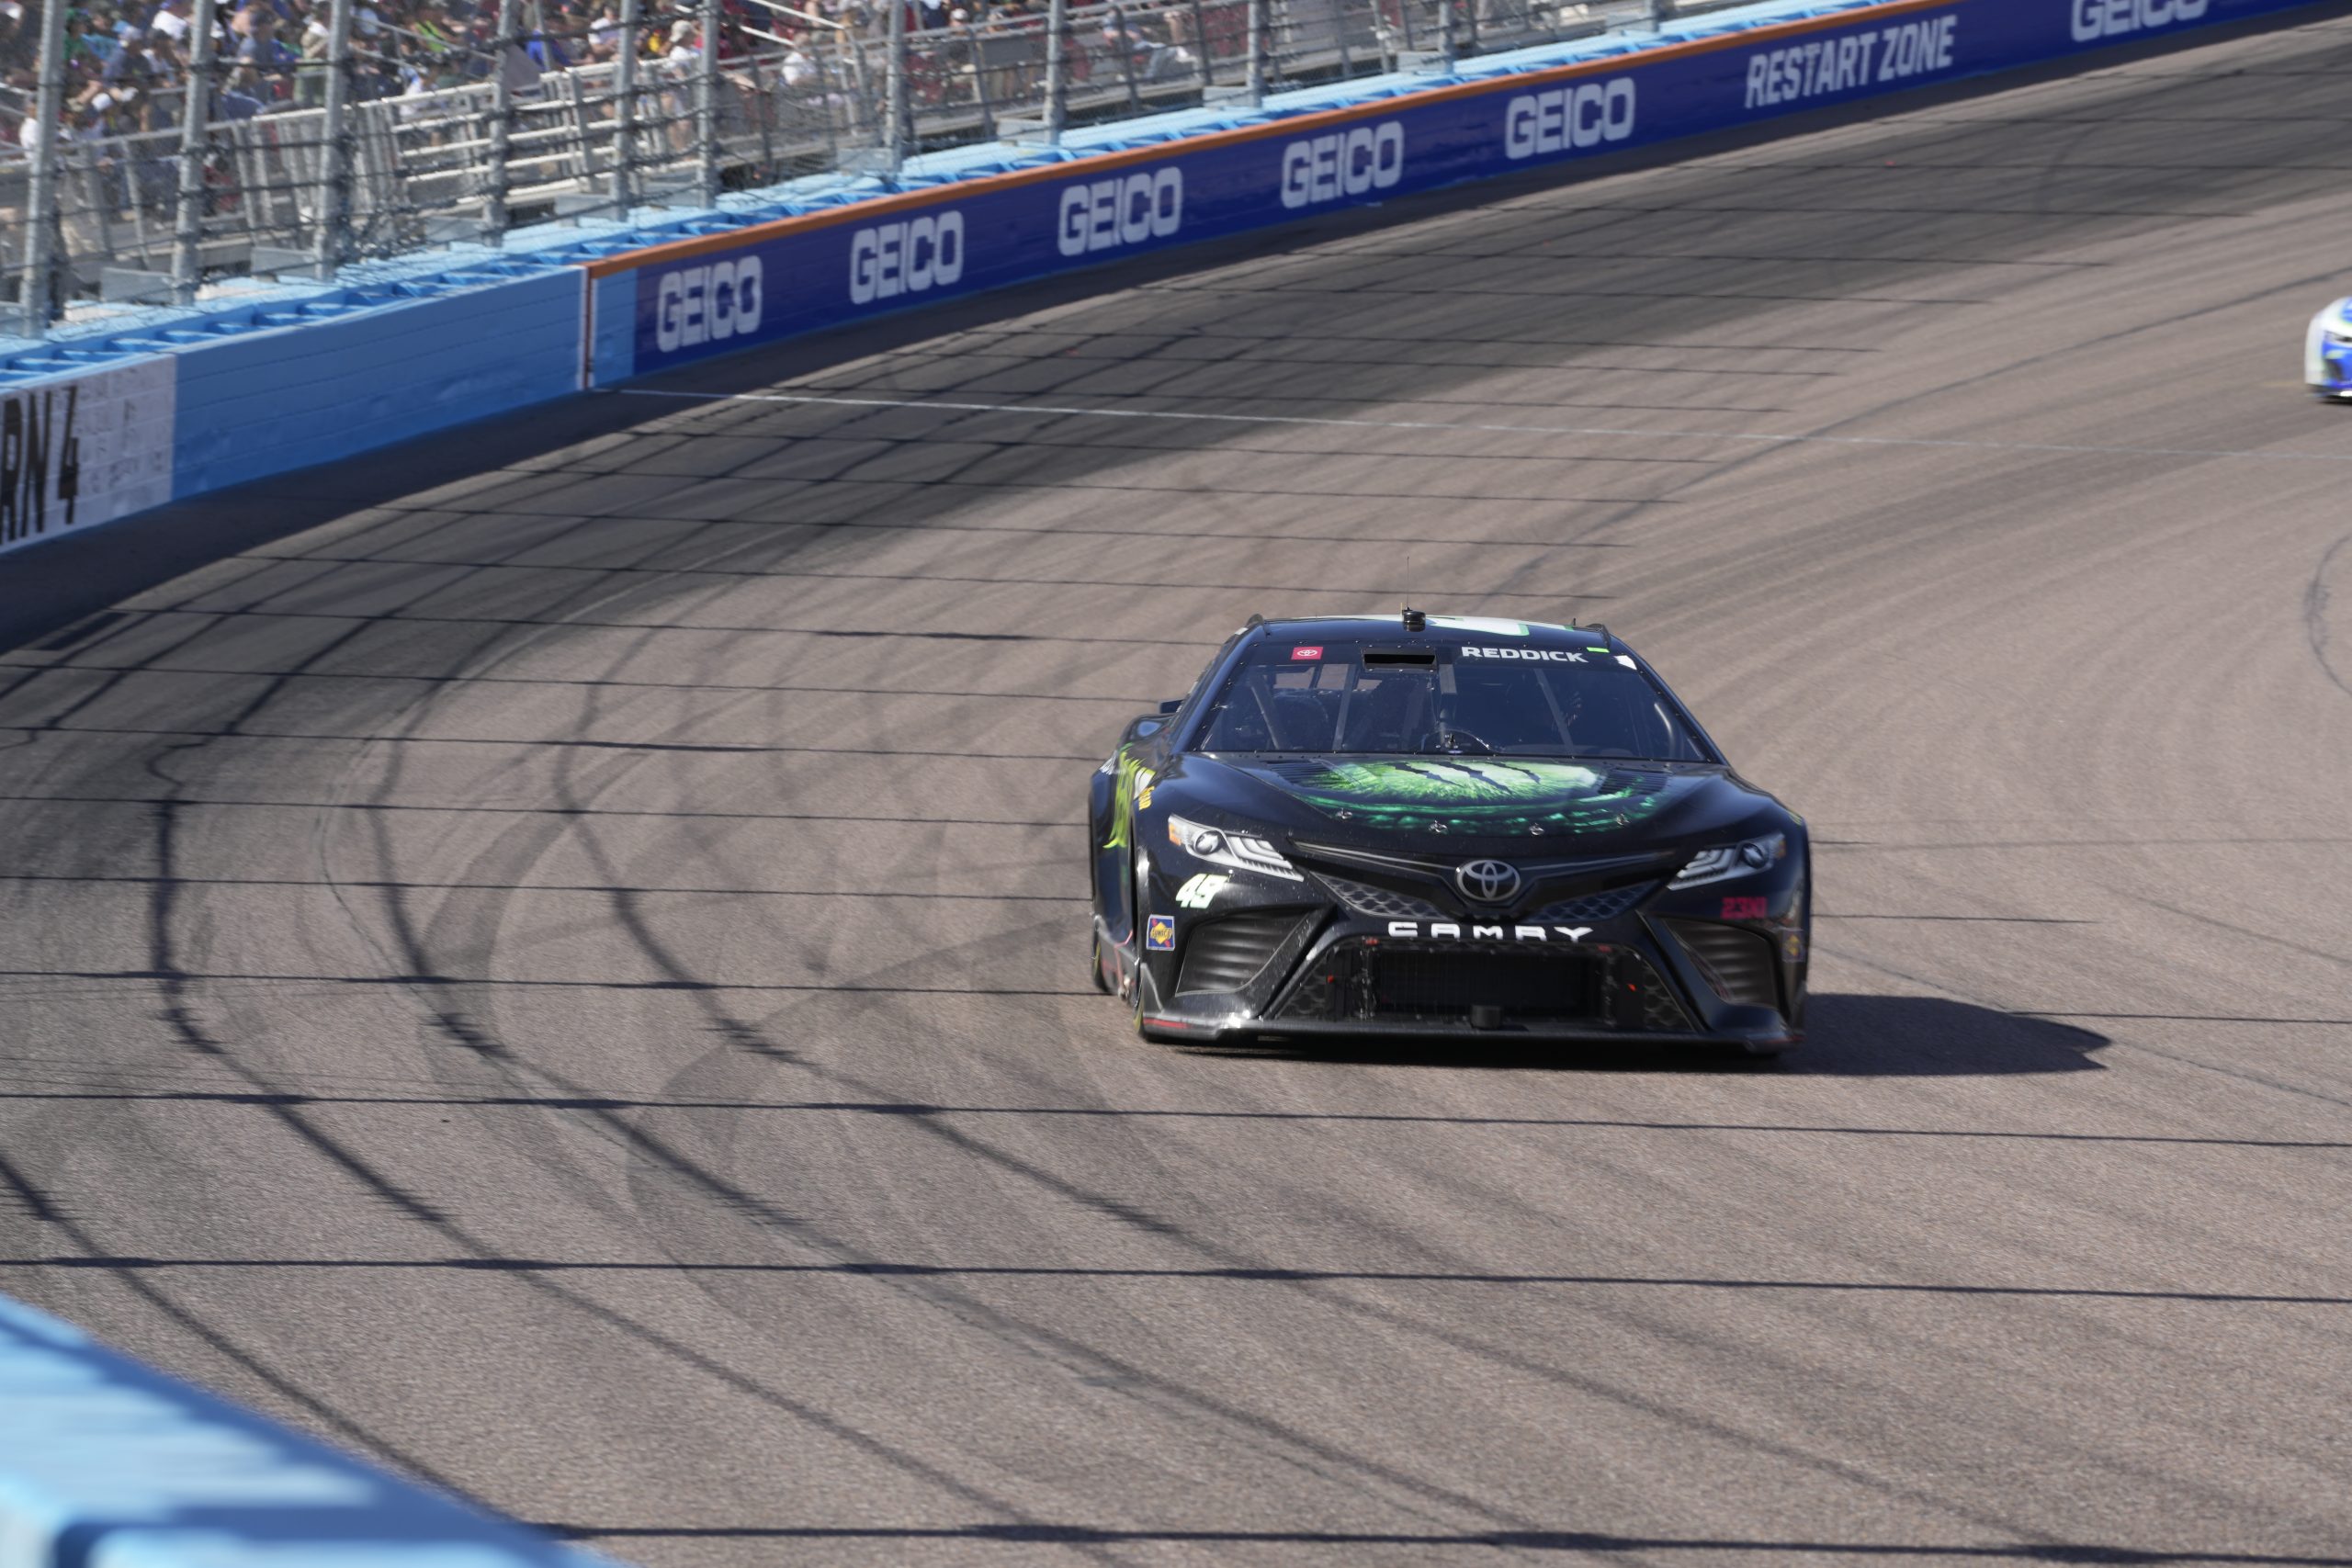 Reddick believed he had a potential race winning No. 45 Toyota Camry at Phoenix. (Photo: Christopher Vargas | The Podium Finish)